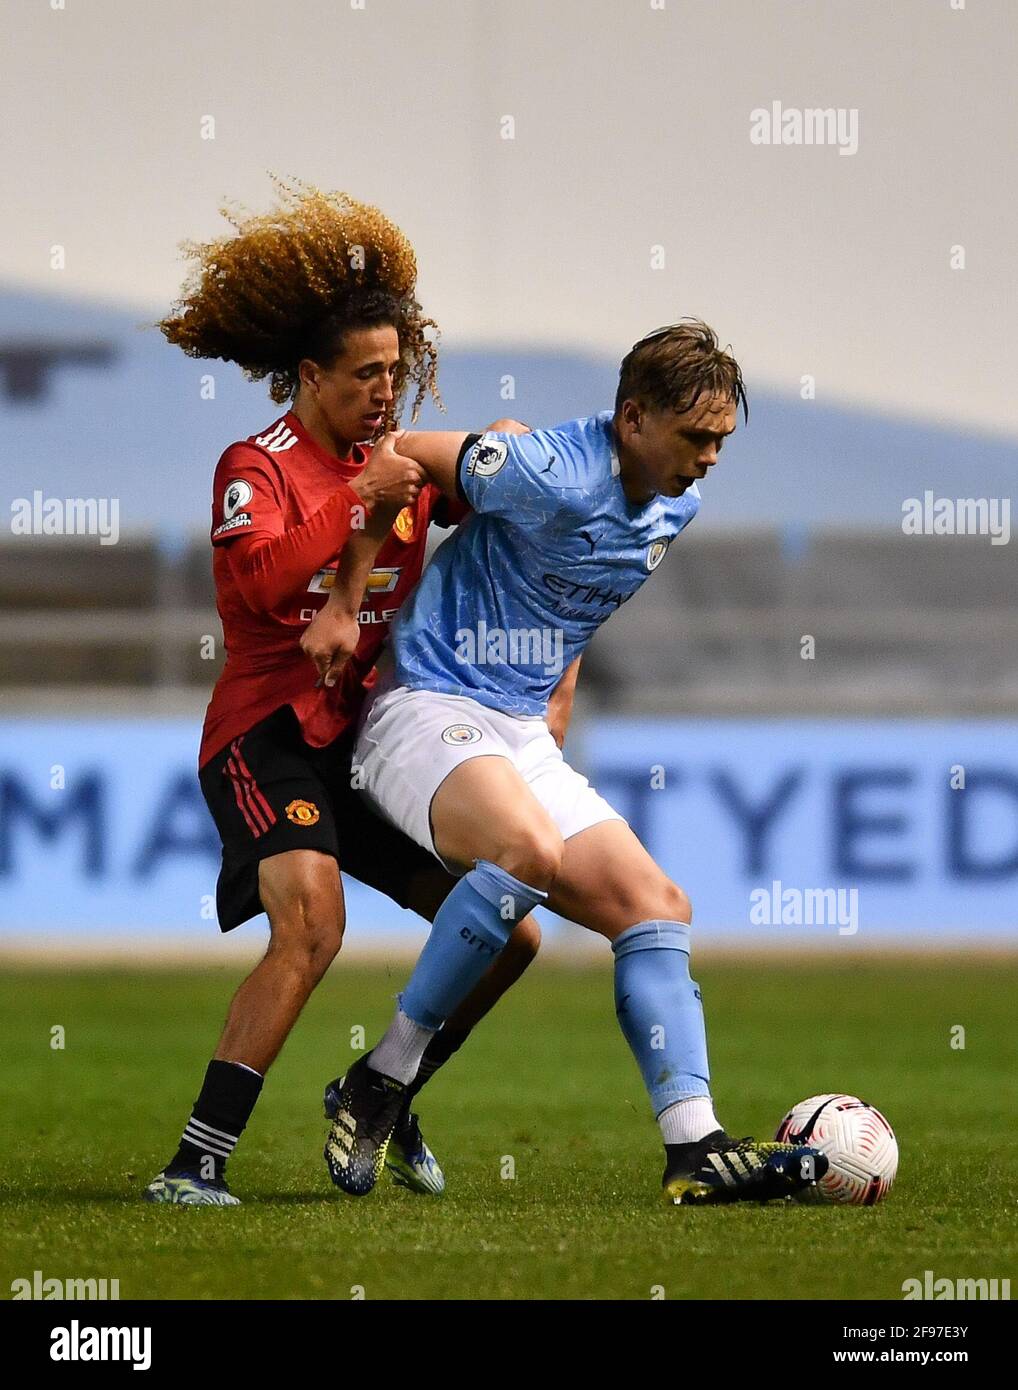 Manchester, UK. 16th Apr, 2021. Callum Doyle (4 Manchester City) battles for the ball with Hannibal Mejbri (10 Manchester United) during the Premier League 2 match between Manchester City and Manchester United at the Academy Stadium in Manchester, England. Credit: SPP Sport Press Photo. /Alamy Live News Stock Photo